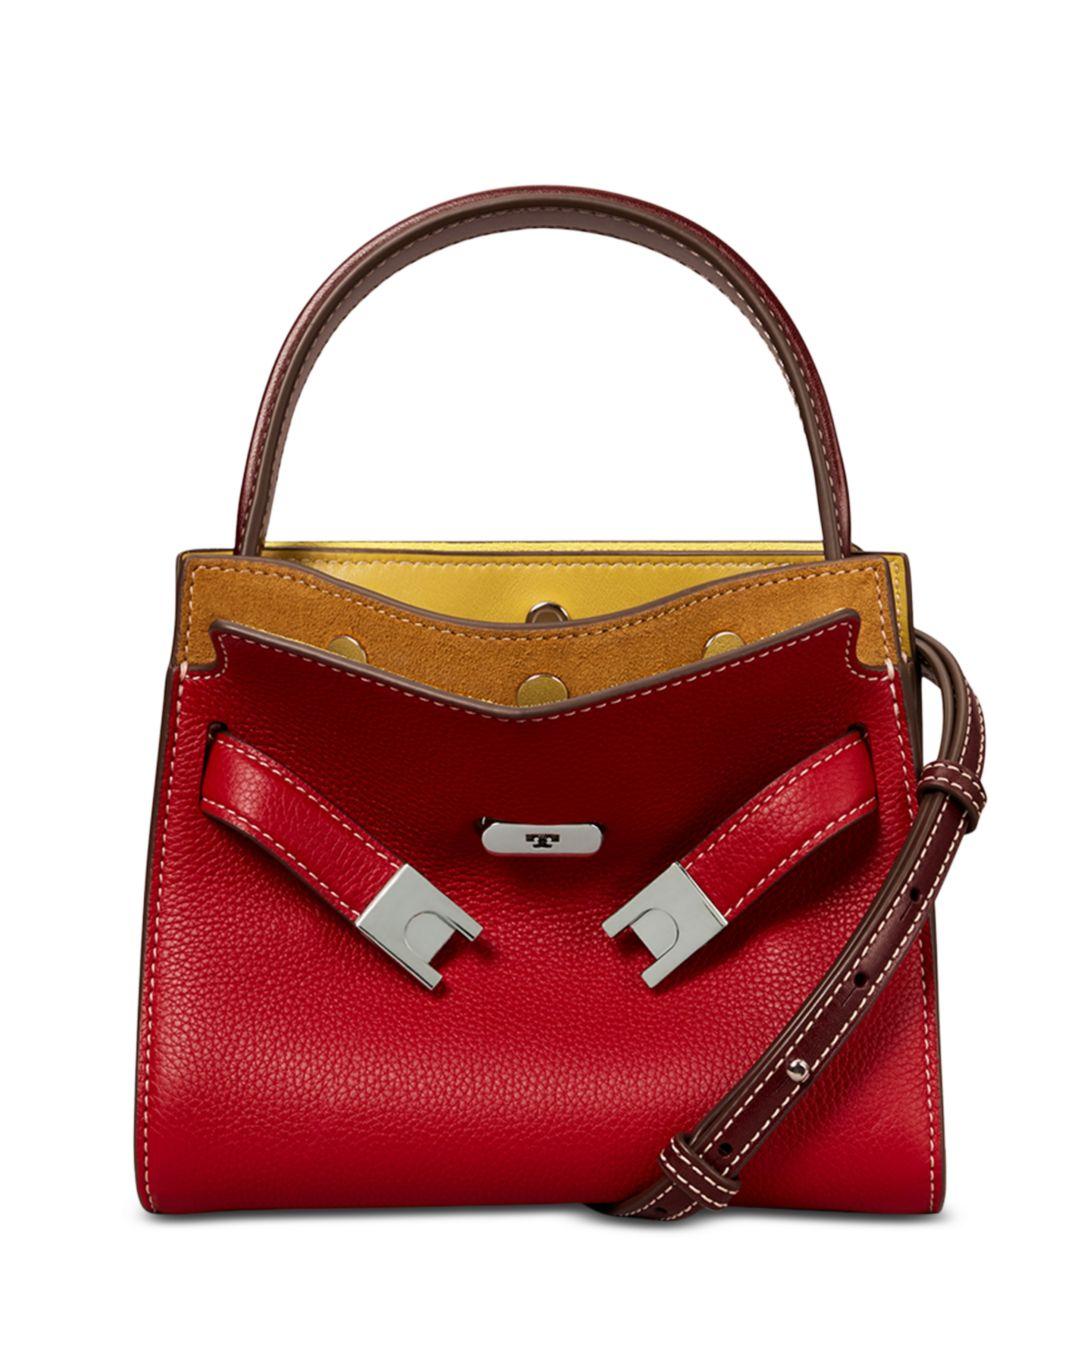 Tory Burch Lee Radziwill Petite Double Satchel Bag in Red | Lyst